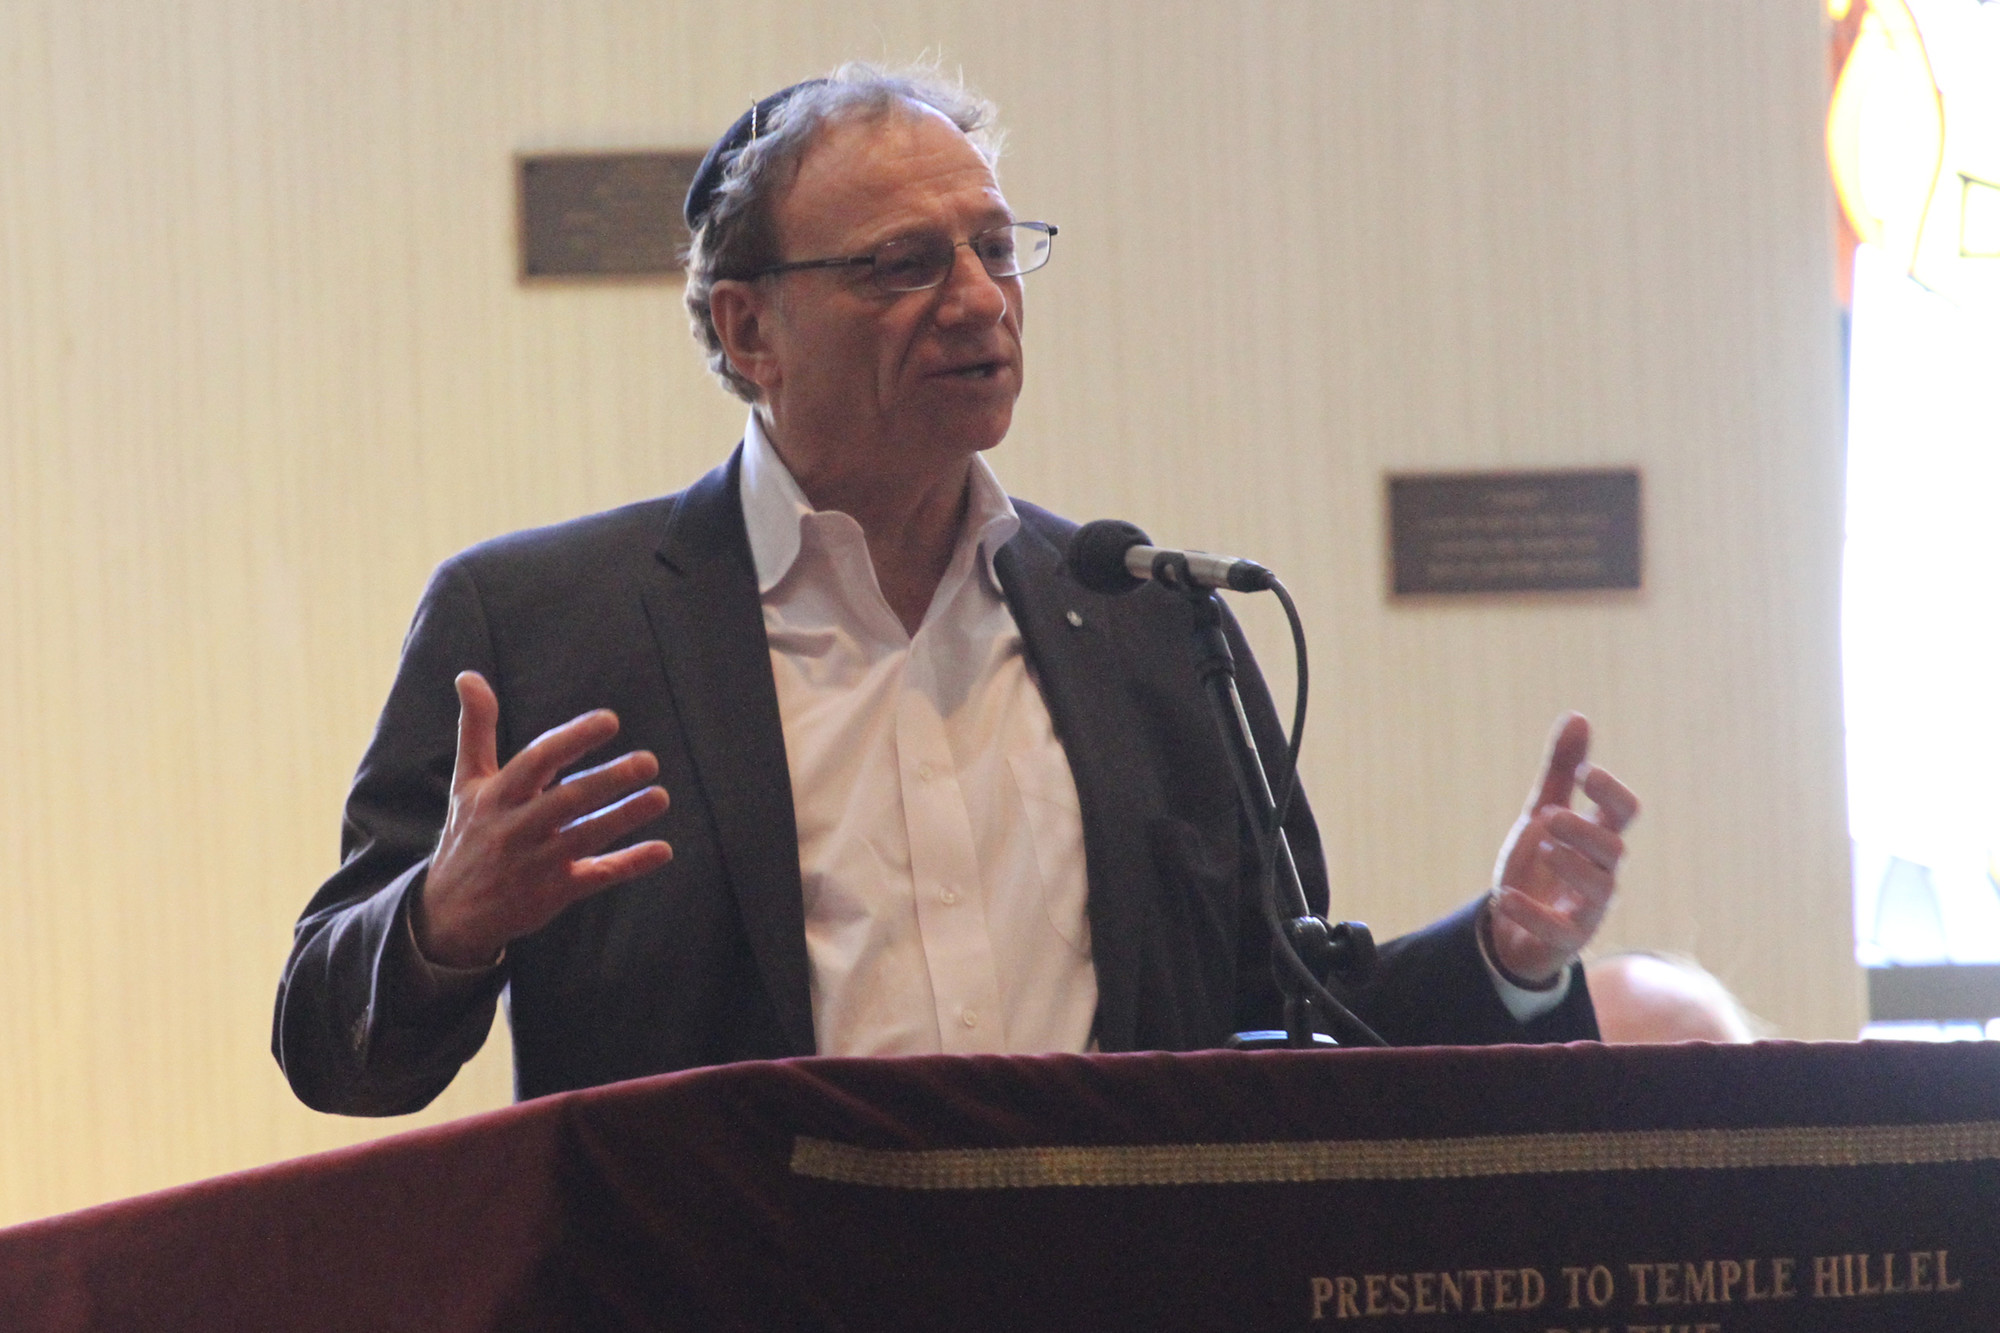 The political summit at Temple Hillel addressed the concerns of voters regarding issues ranging from the economy to healthcare. Political strategist Hank Sheinkopf was one of several speakers at the forum.